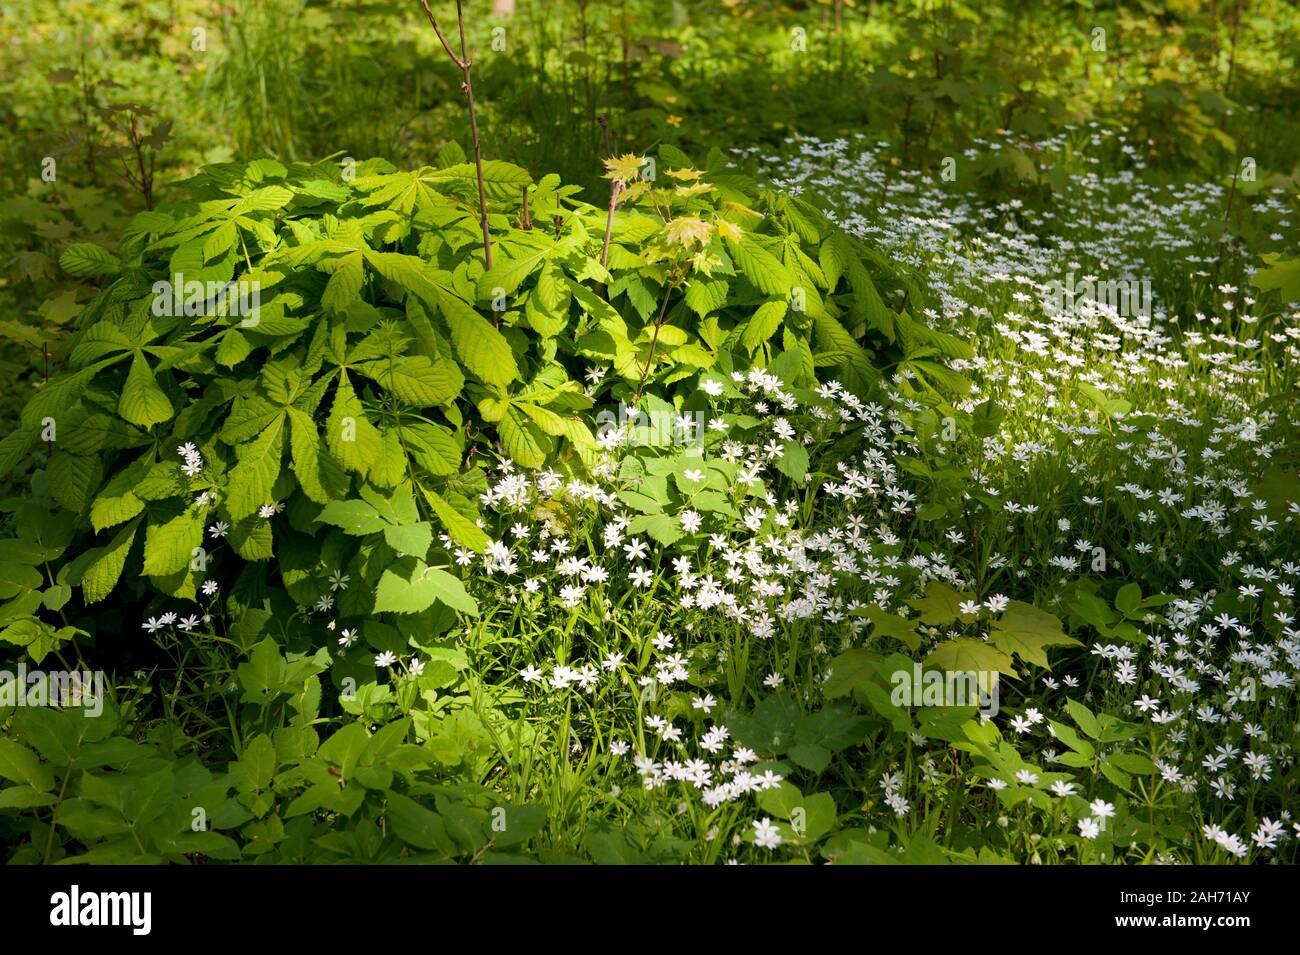 Springtime plants in morning sunlight, young woods natural view with chestnut tree and white flowers growing as the ground cover. Rights managed. Stock Photo